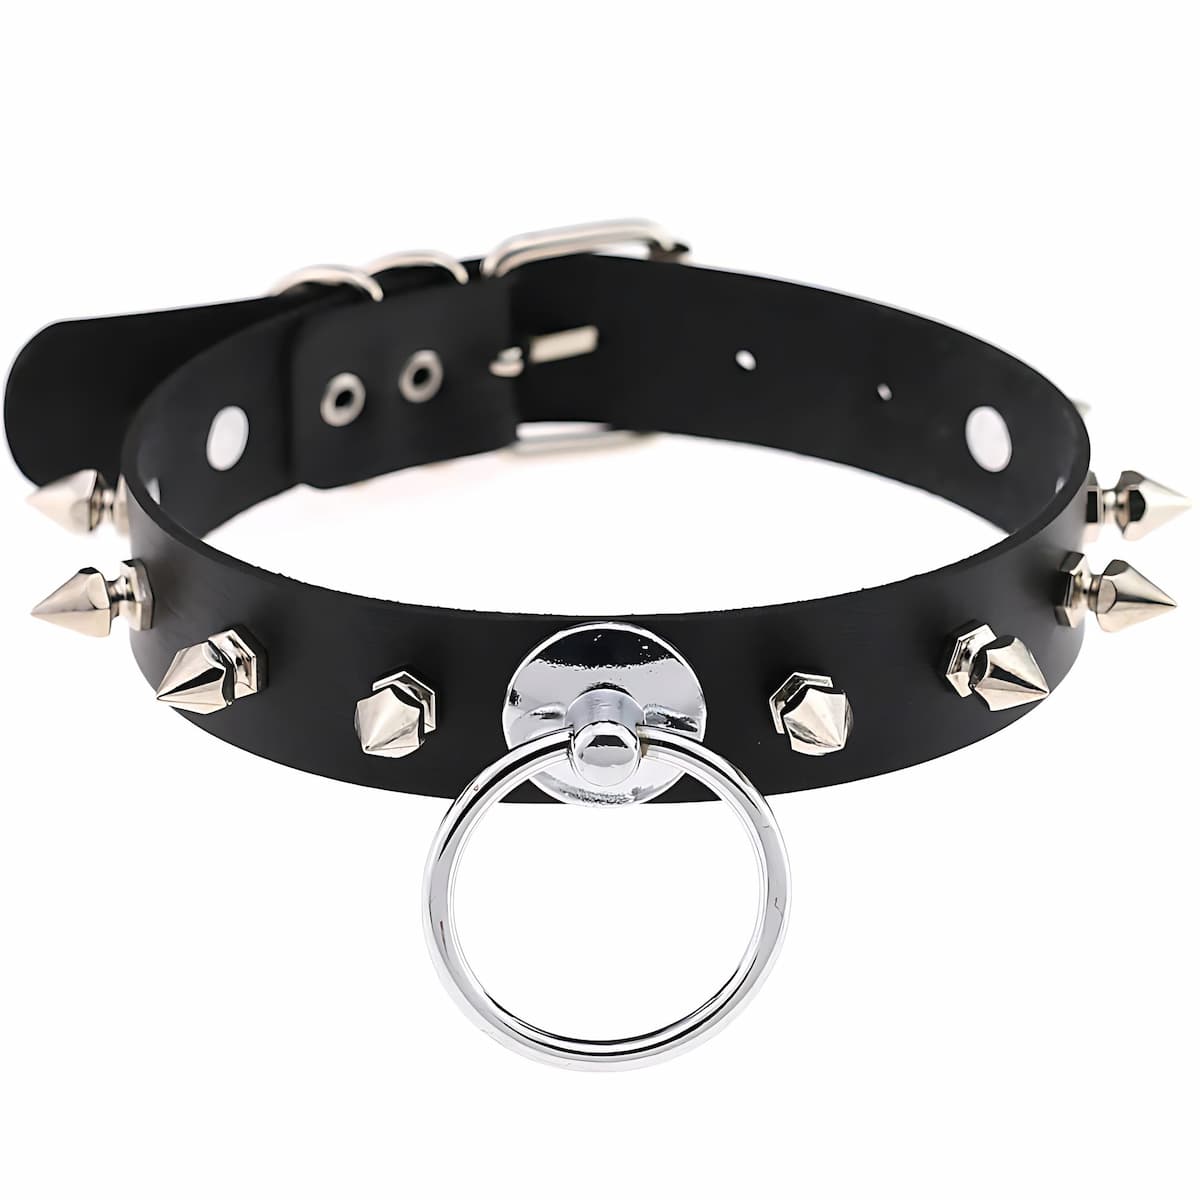 Leather Gothic Choker Collar Style JDDHXQ Xenos Jewelry